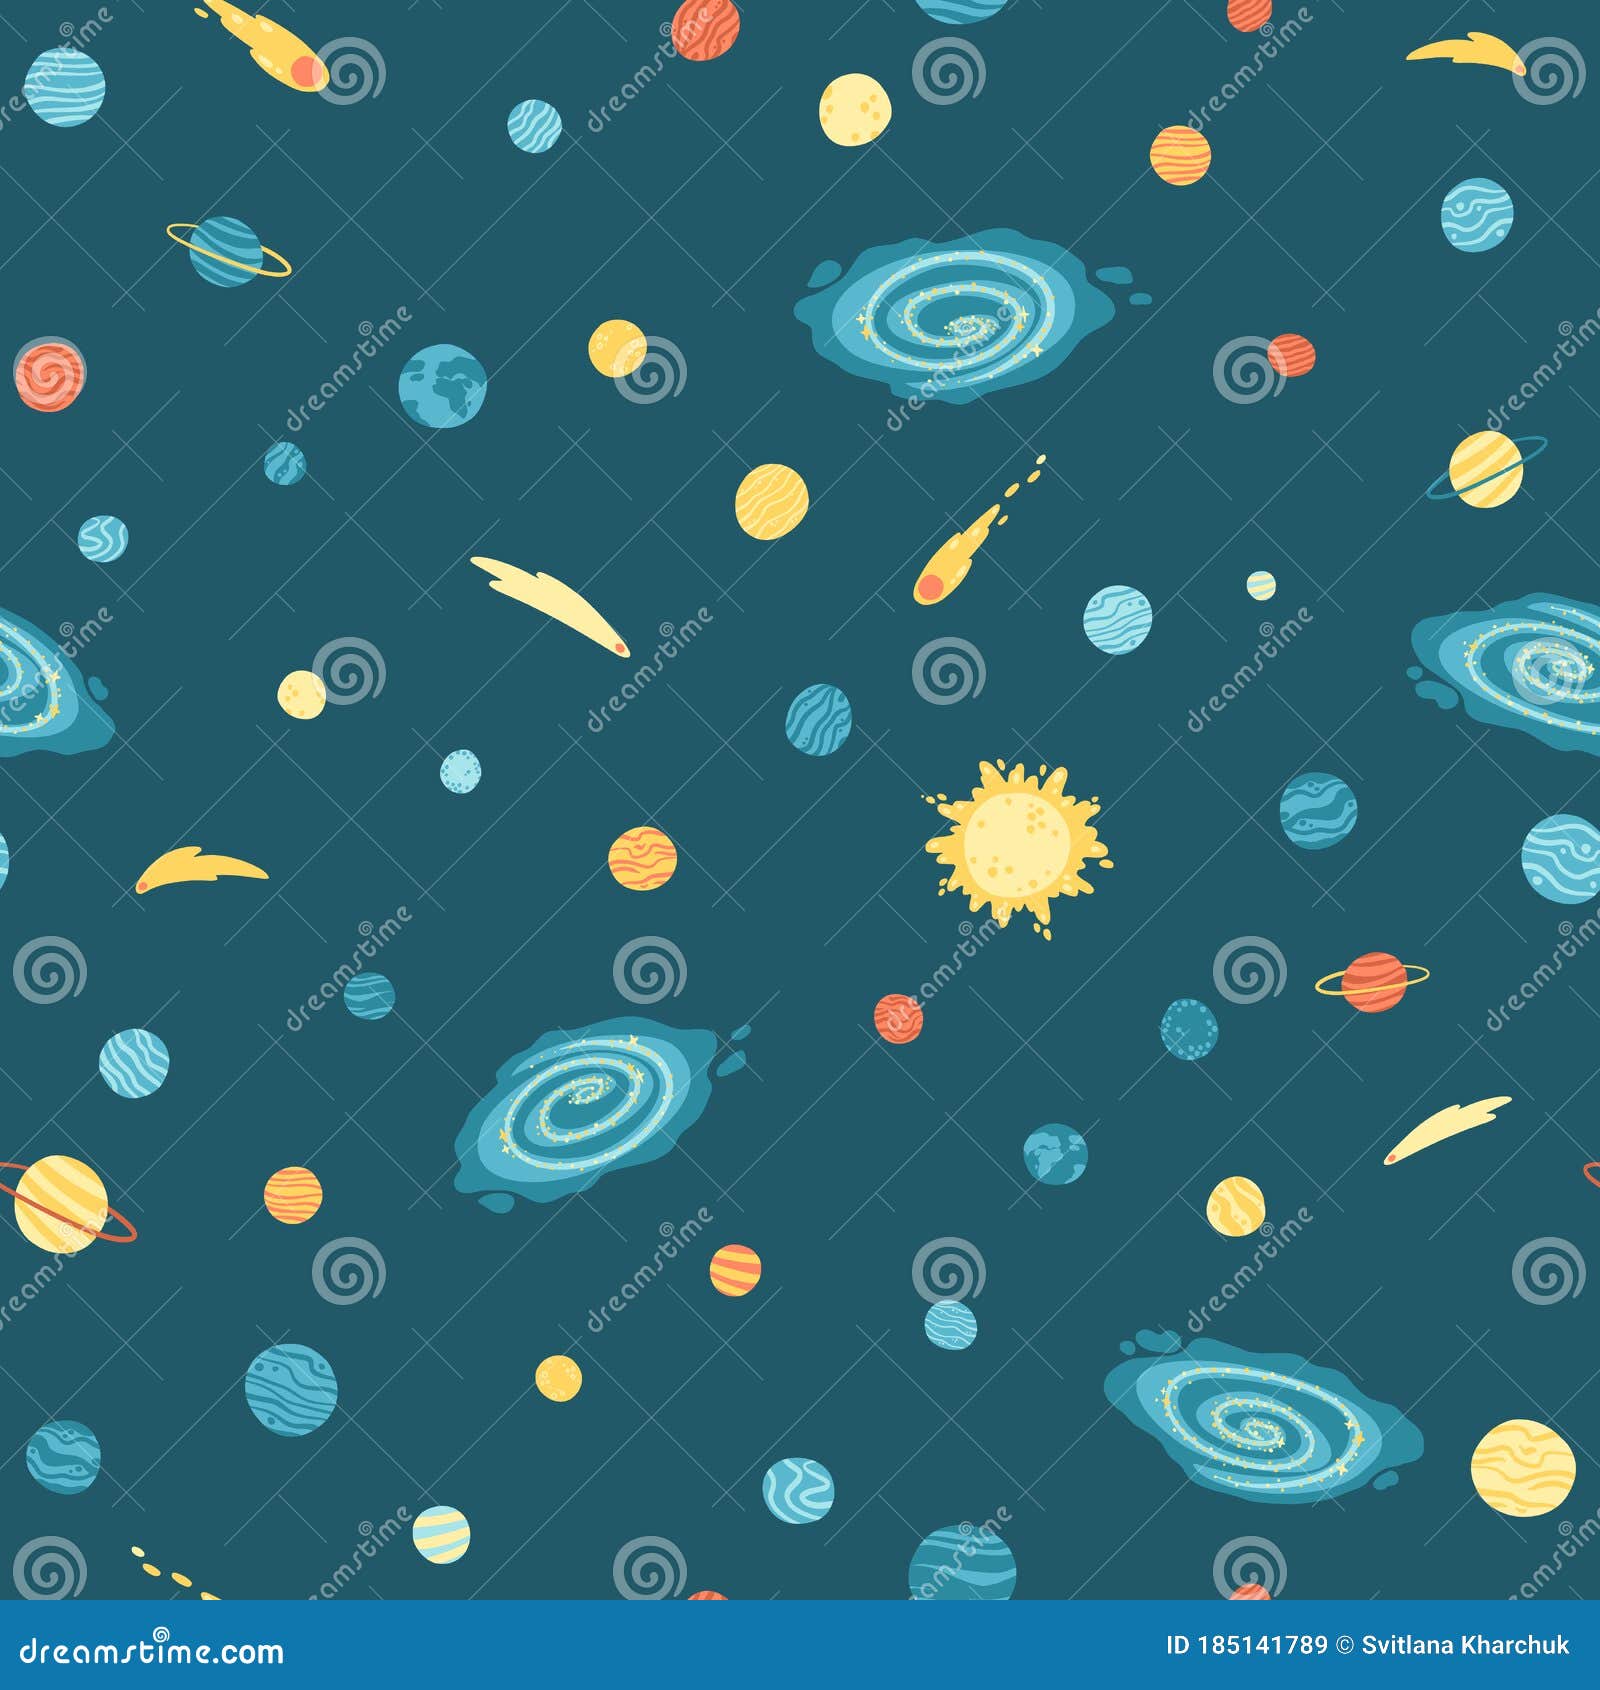 galaxy cosmic seamless pattern with planets, stars and comets. childishly  hand-drawn cartoon  in